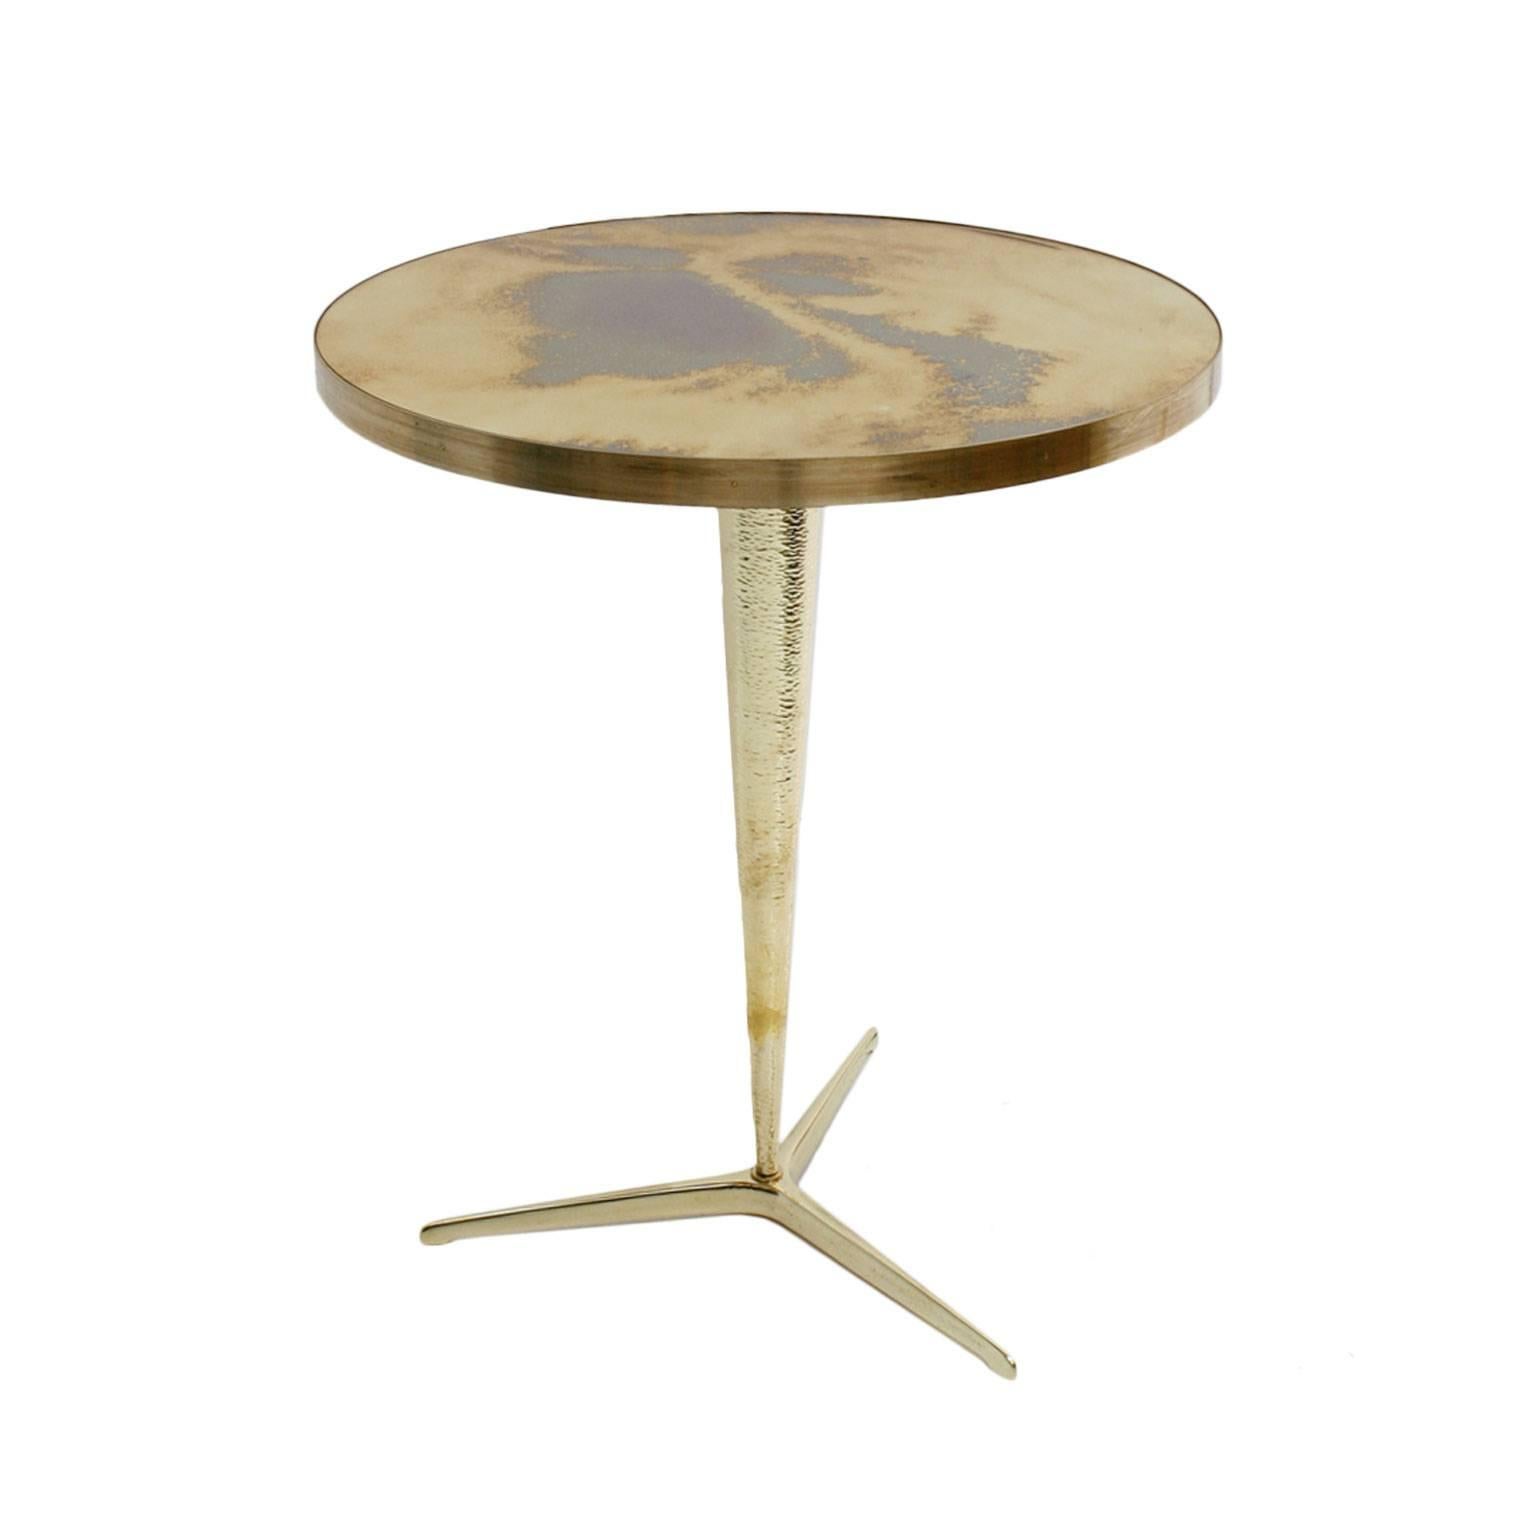 Pair of pedestal tables with brass structure, handmade hammered base, bronze feet and aged mirror glass envelope, Italy.